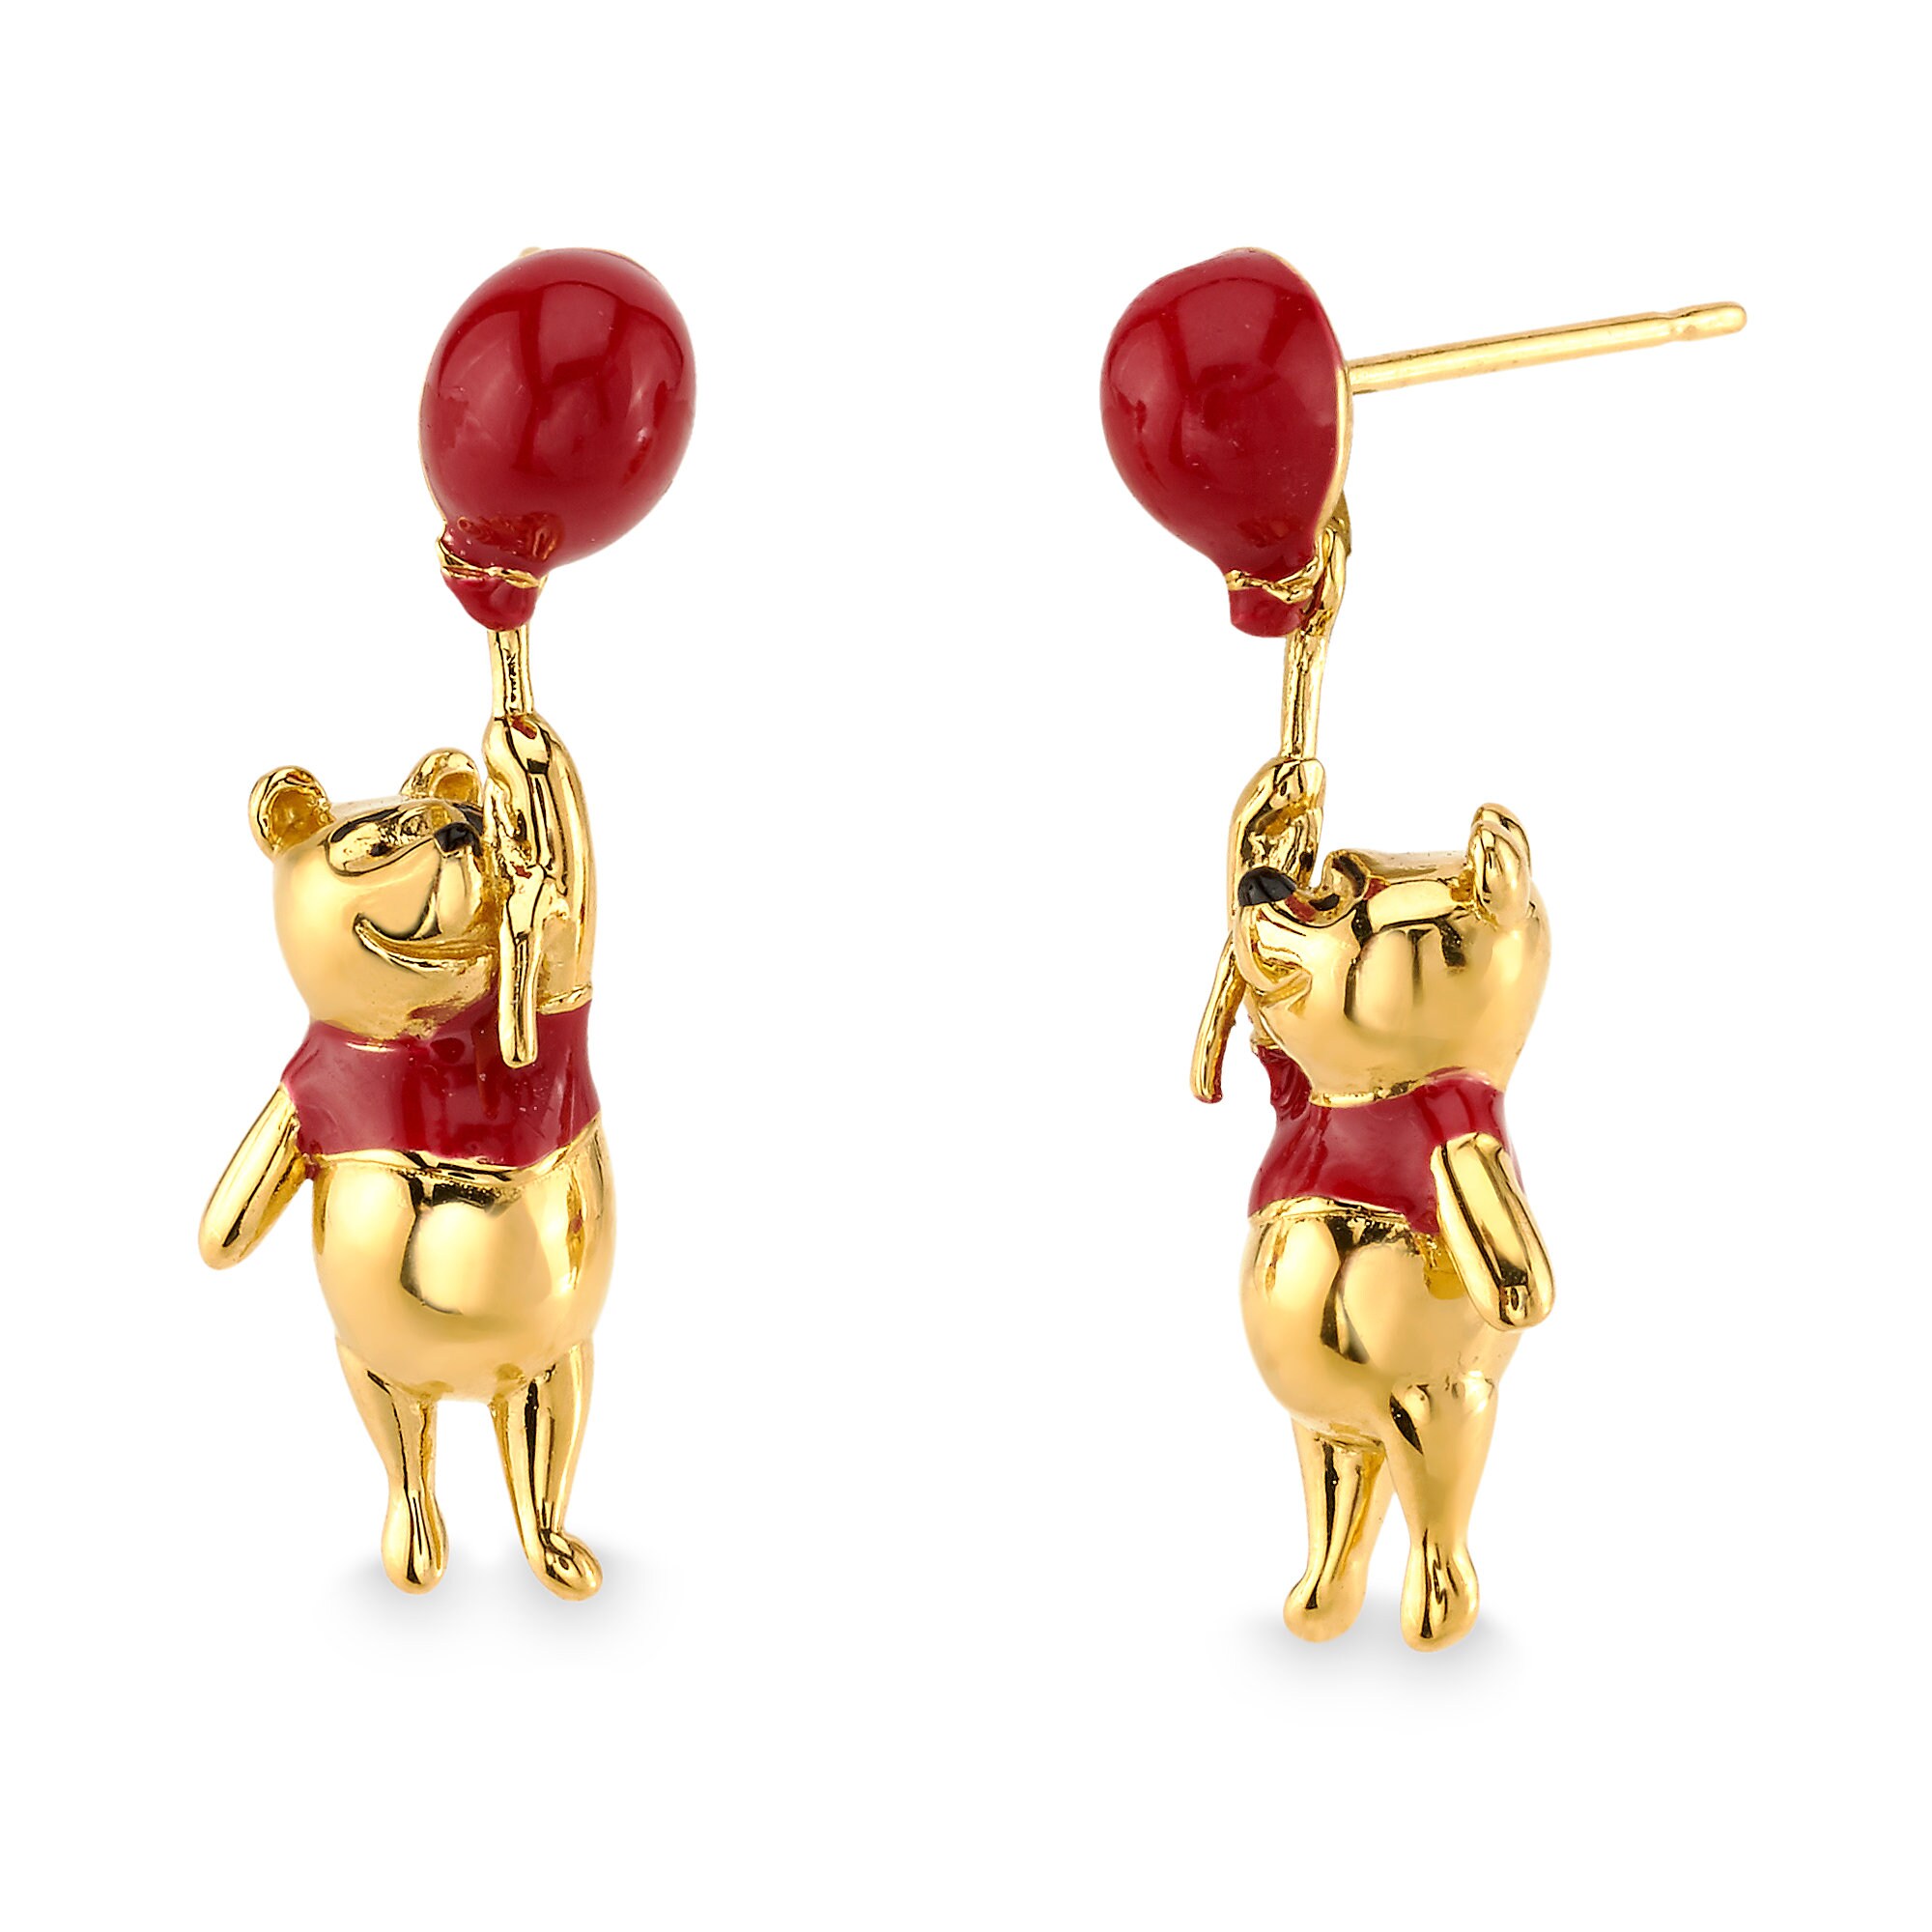 Winnie the Pooh Earrings by RockLove - Christopher Robin